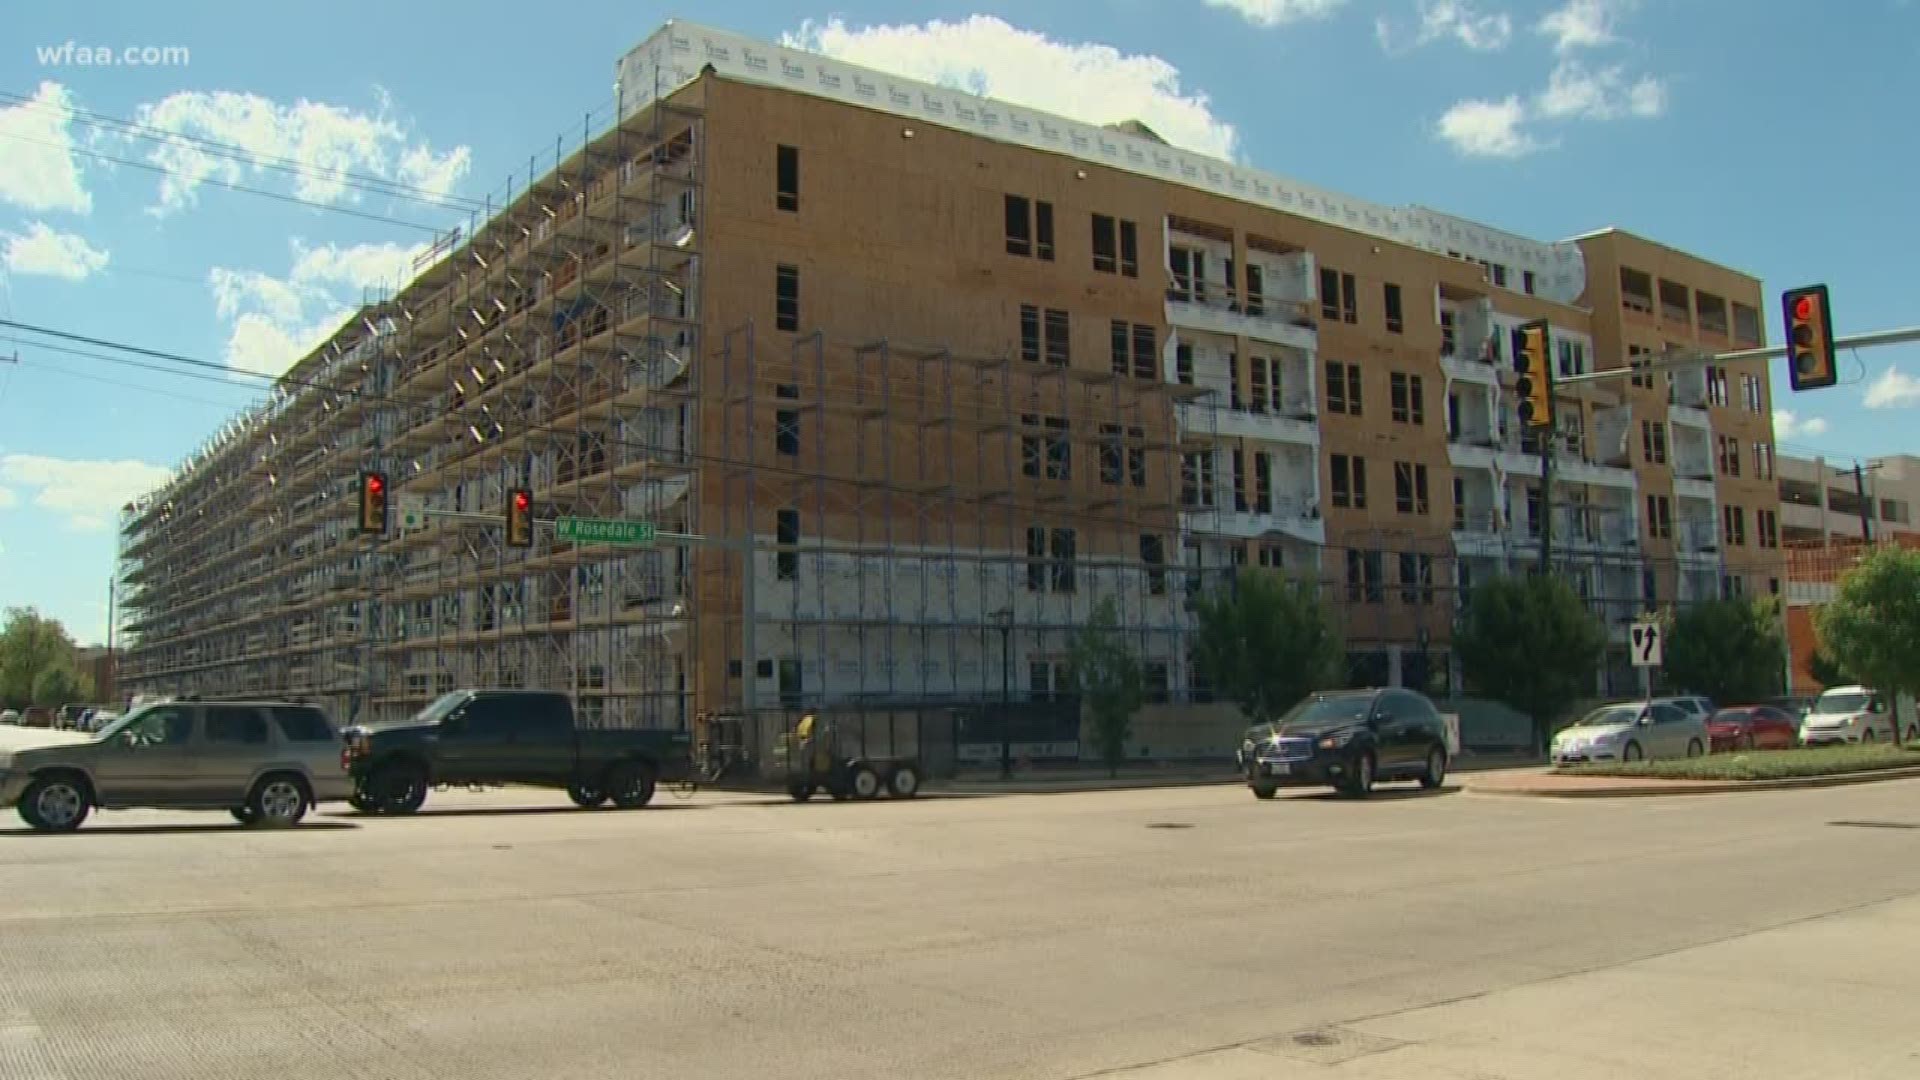 The Dallas-Fort Worth region is adding more apartment units than Seattle and New York.